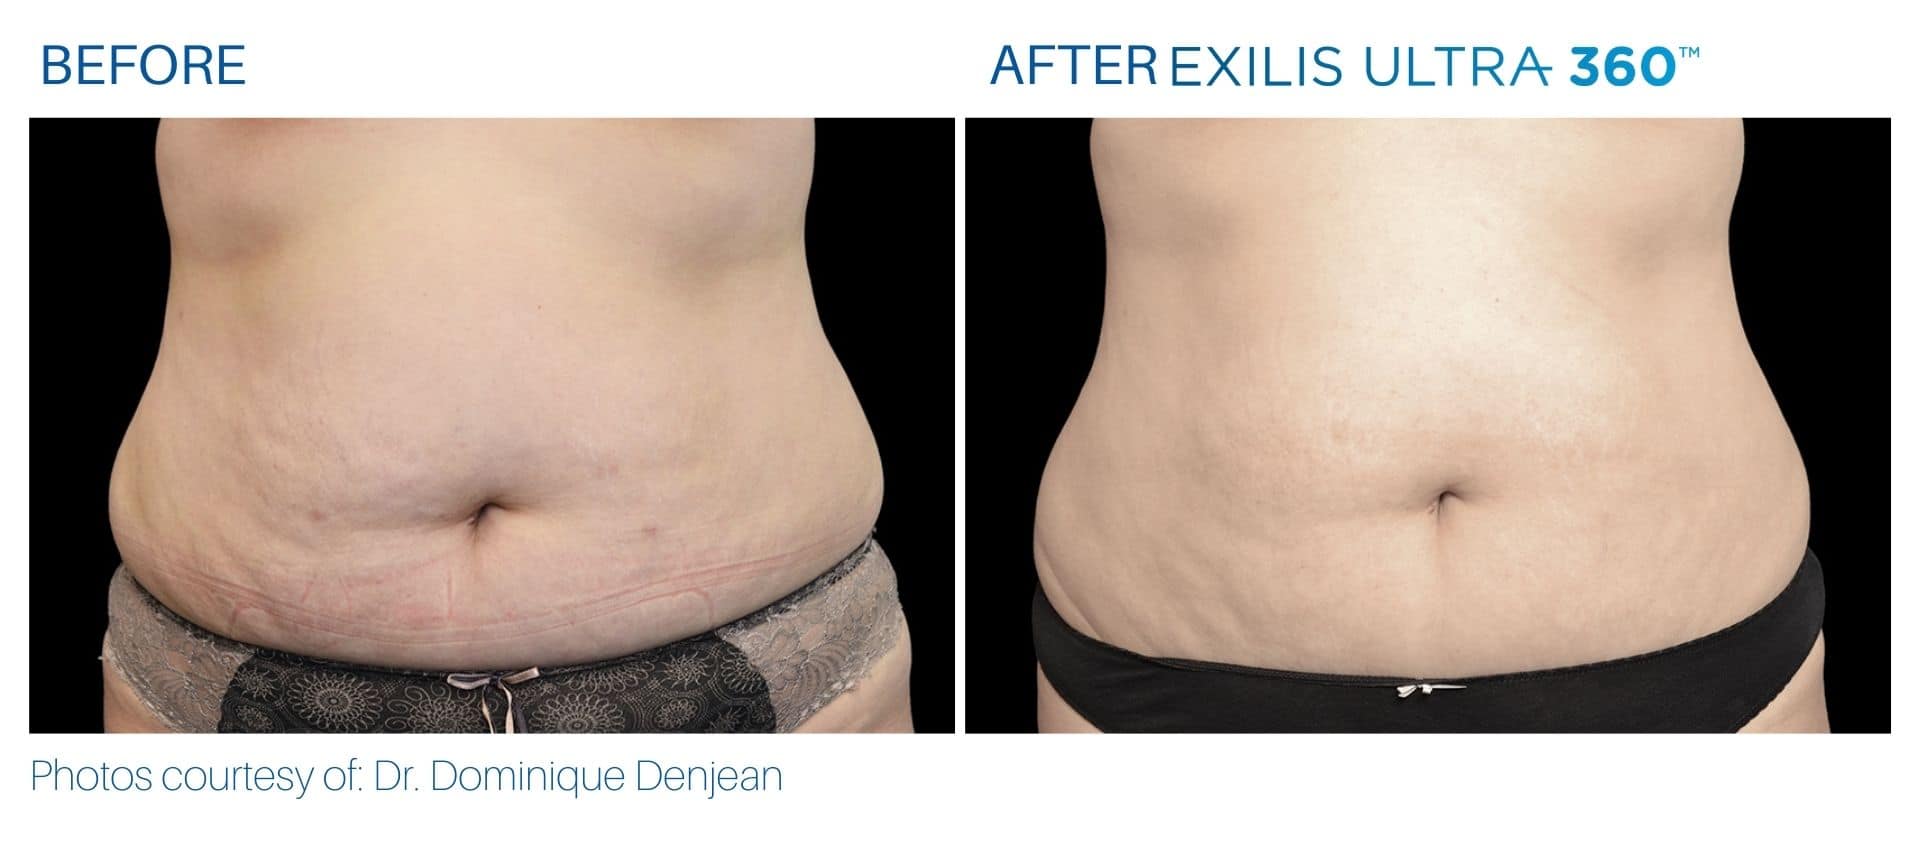 exilis ultra before and after treatment belly fat area